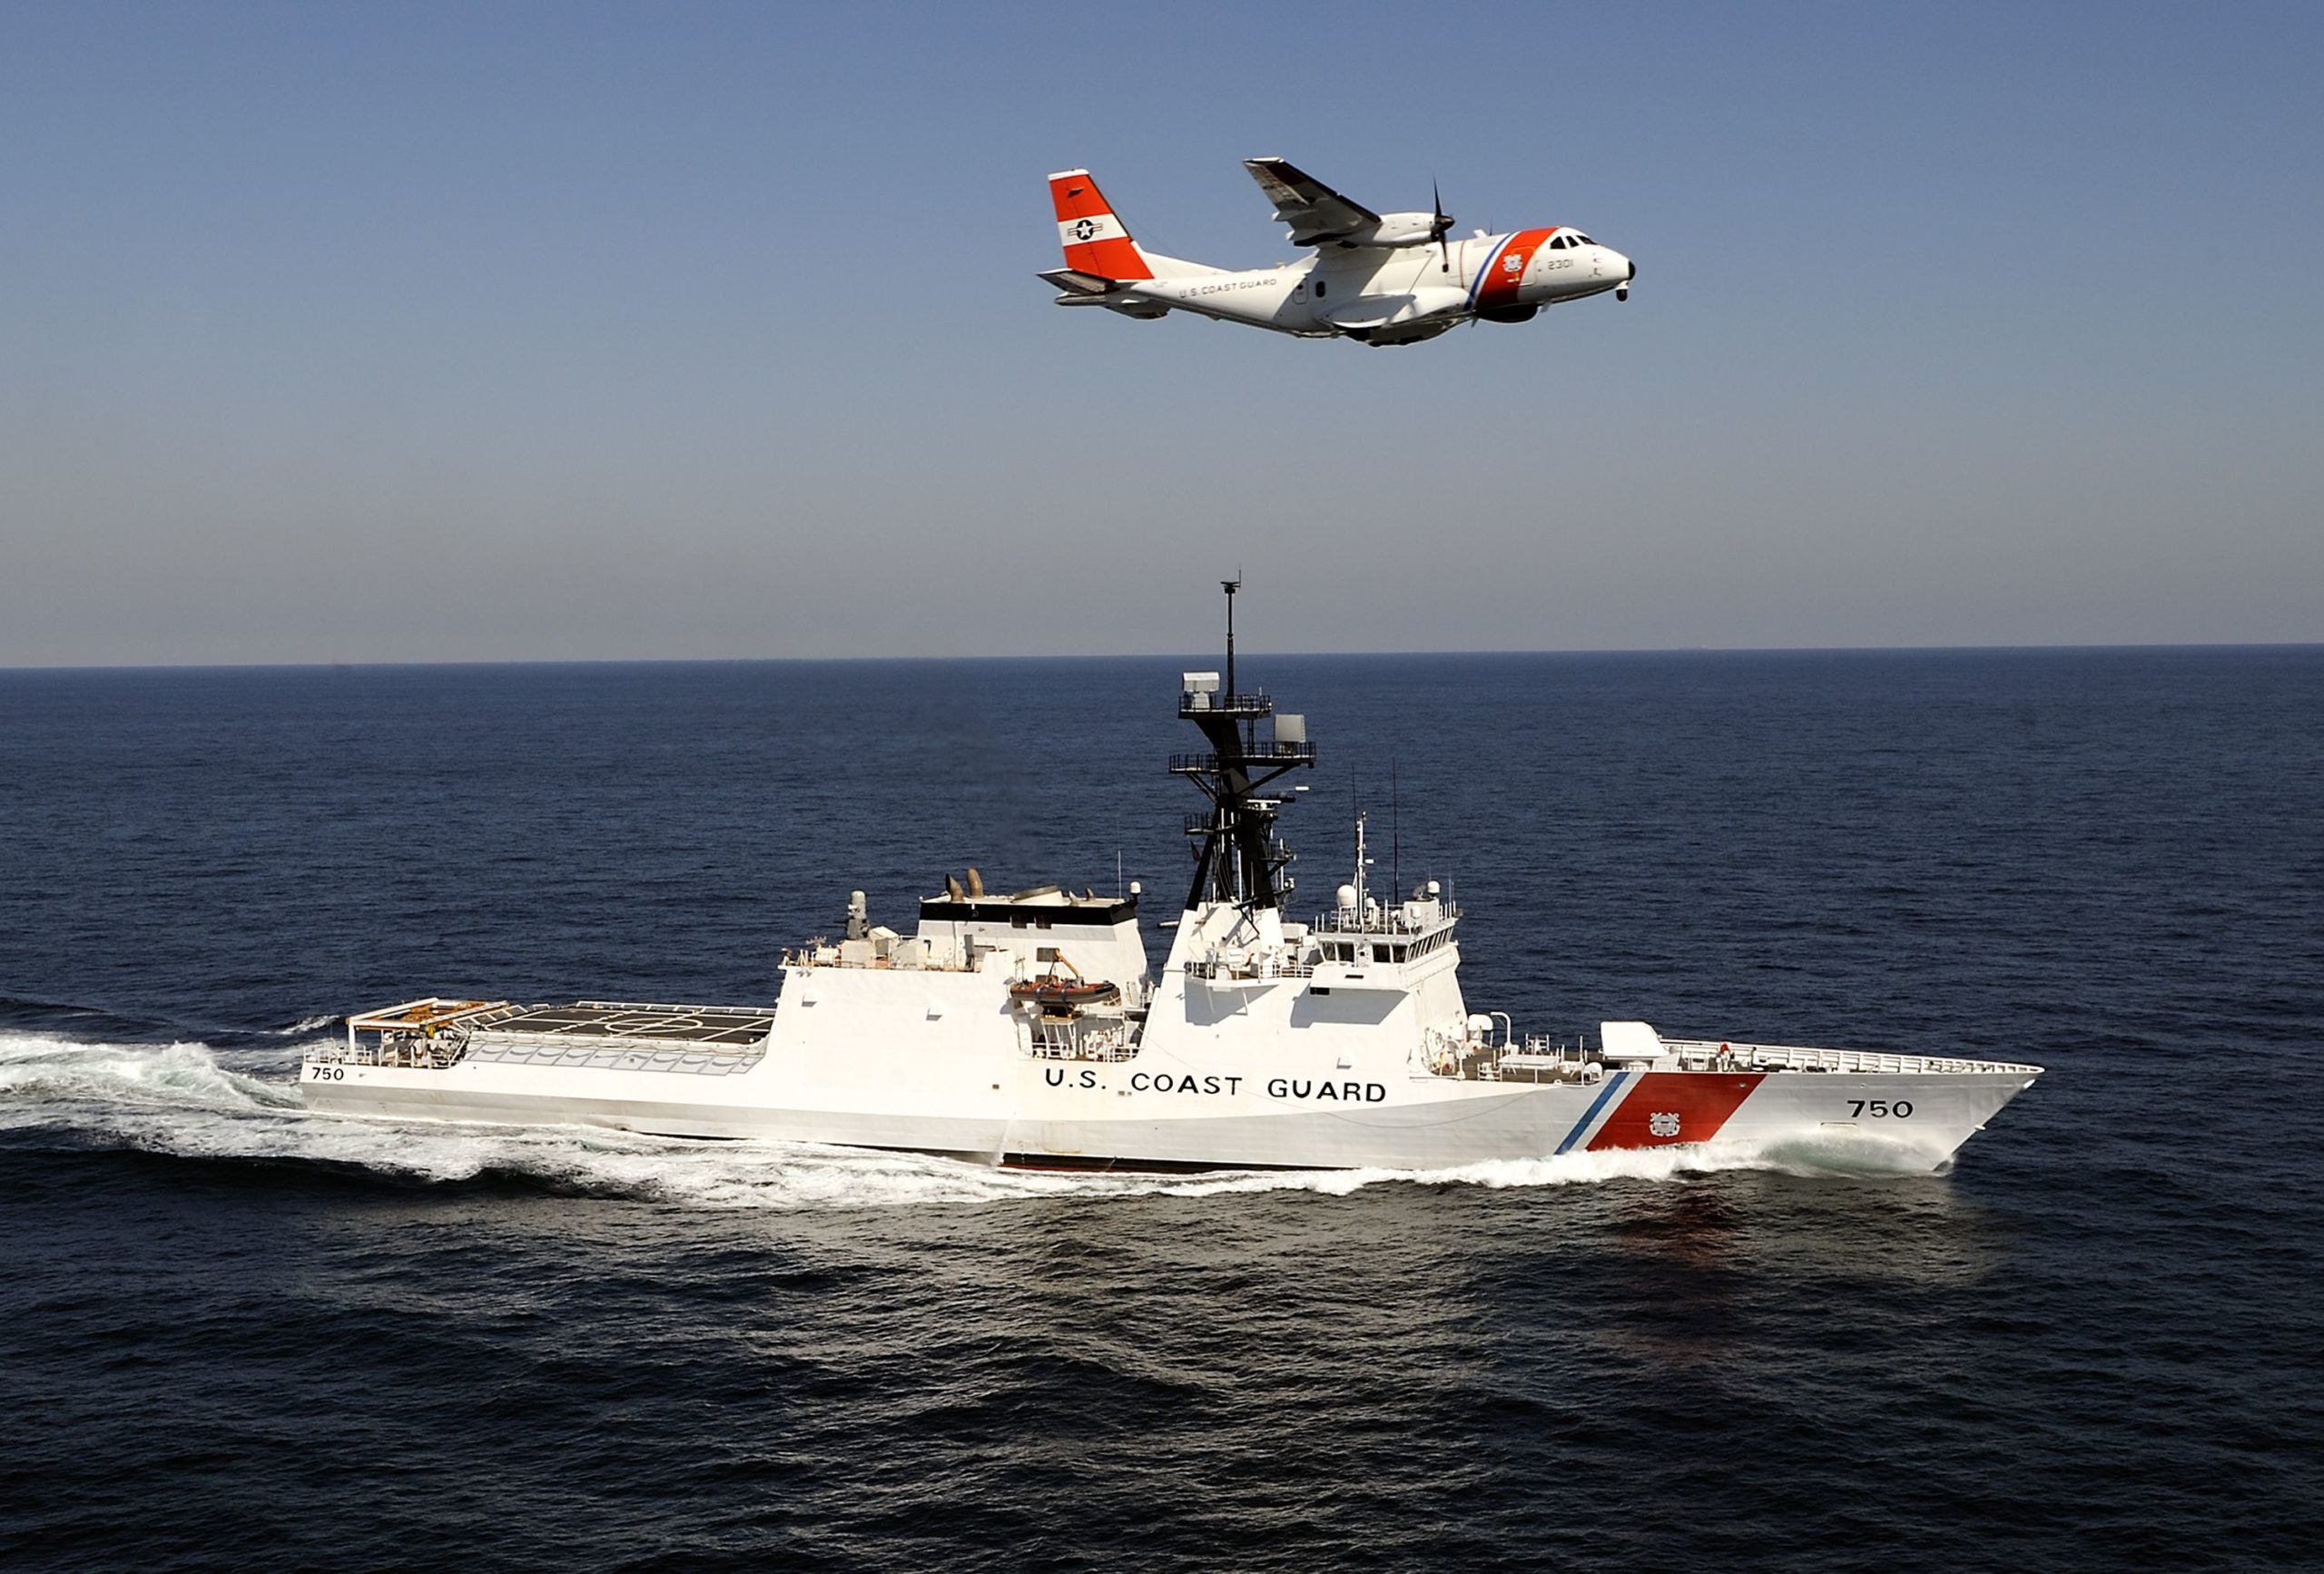 US national security adviser said the US Coast Guard (USCG) was basing Enhanced Response Cutters in the western Pacific for maritime security missions, citing illegal fishing and harassment of IUU (Illegal, Unreported, Unregulated) fishing vessels by China.